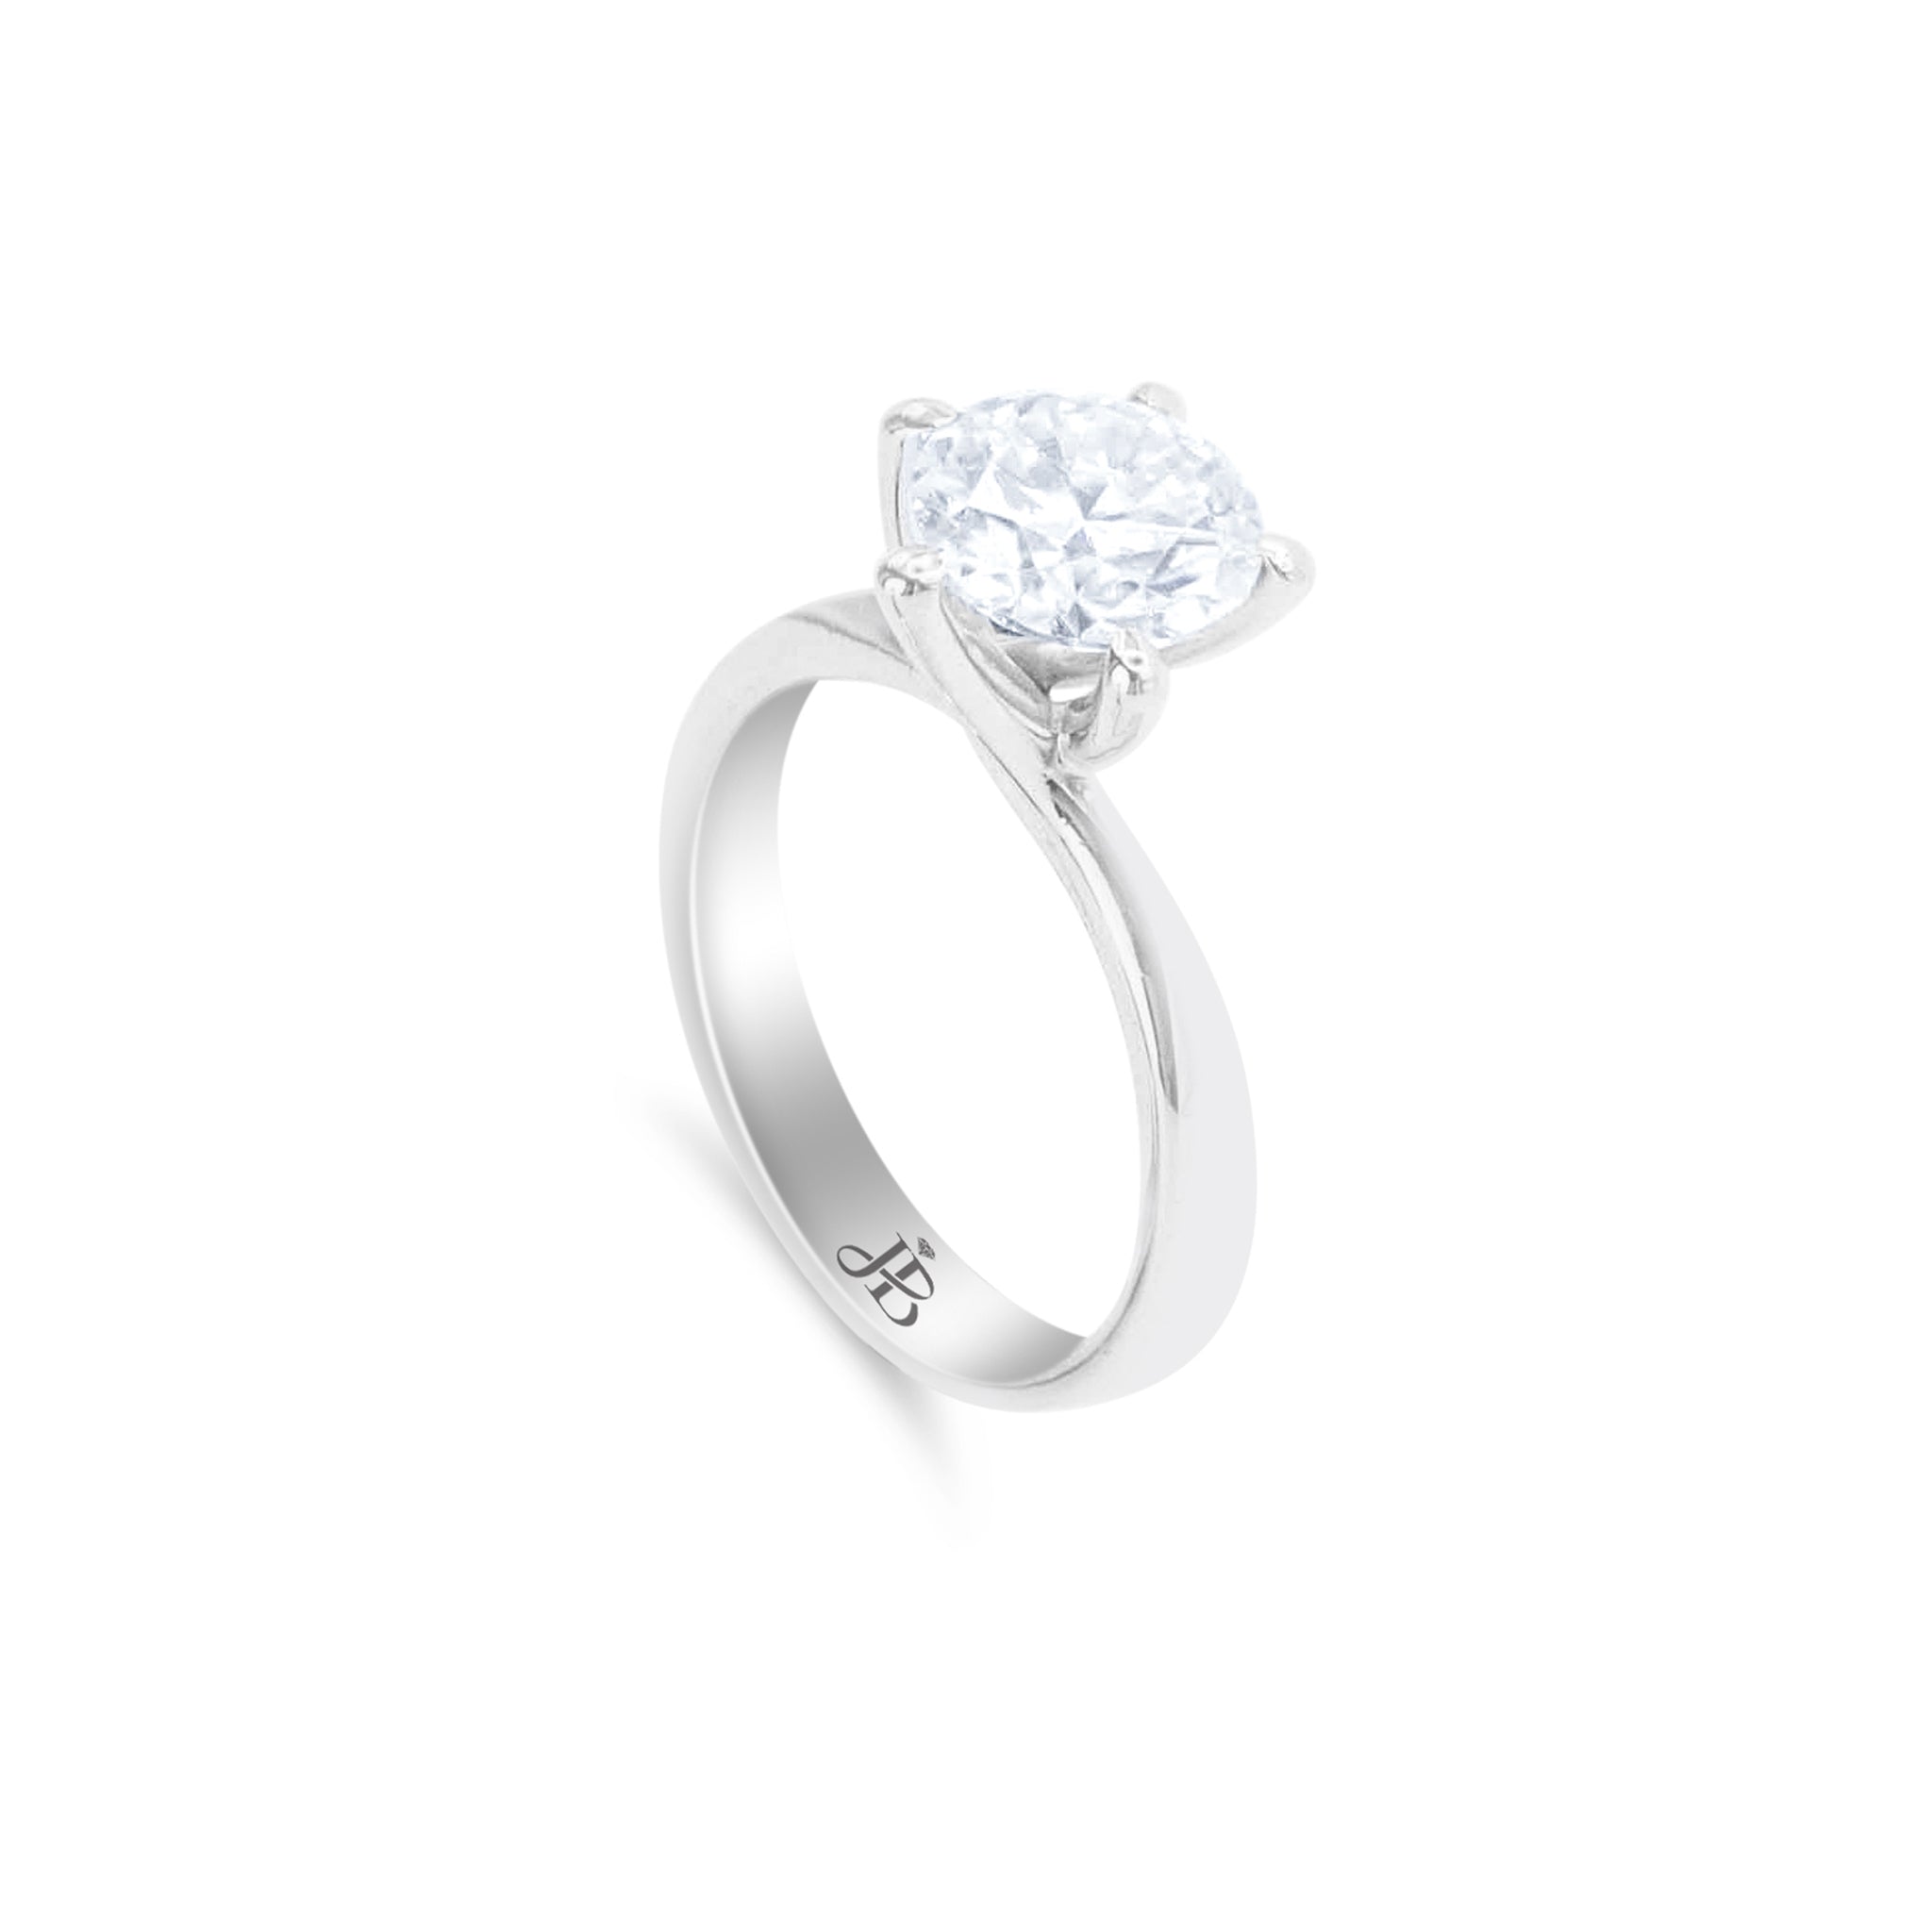 SOLITAIRE - Just Brilliant, Marry Me Collection, Lab Diamonds